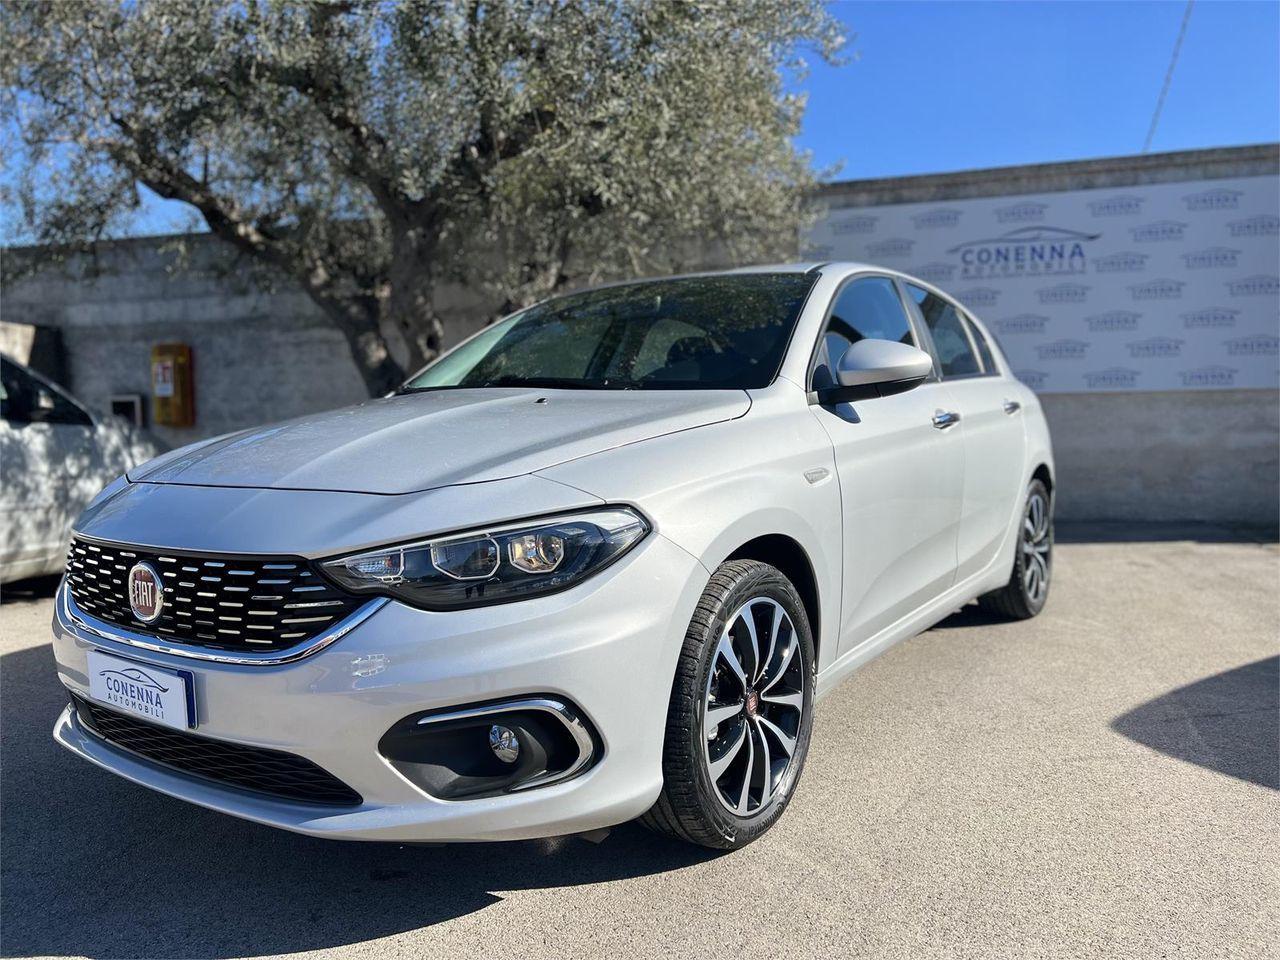 FIAT Tipo Tipo 1.6 Mjt S&S 5p. Business